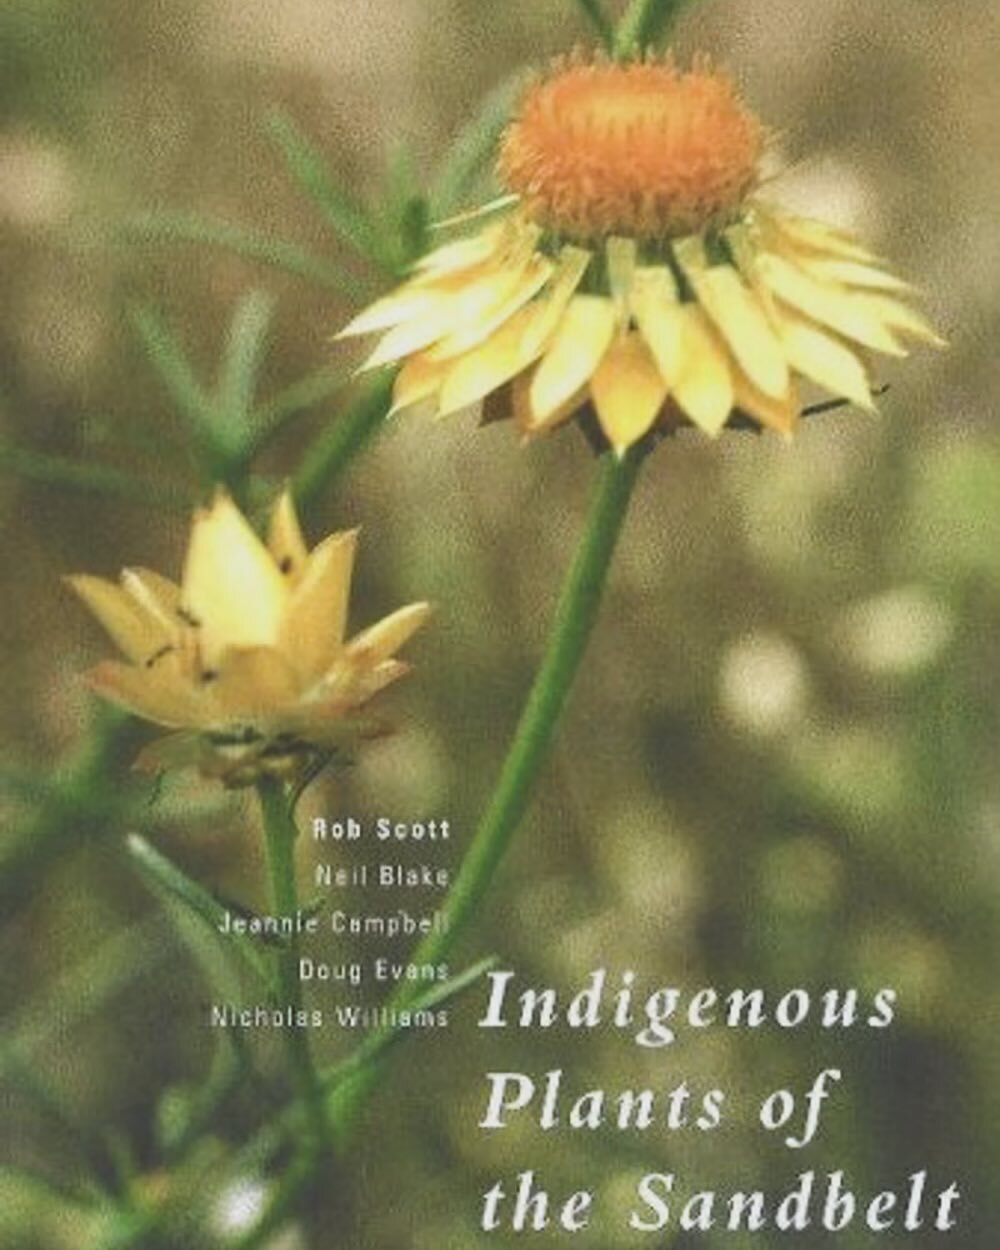 On the hunt for this out-of-print book 🌼 $371.99 on AbeBooks seems a touch pricey/extortionate 🙄 and the one I ordered at the library is &ldquo;missing&rdquo;, a.k.a. probably liberated by another plant nerd? I&rsquo;ll get hold of a library copy e